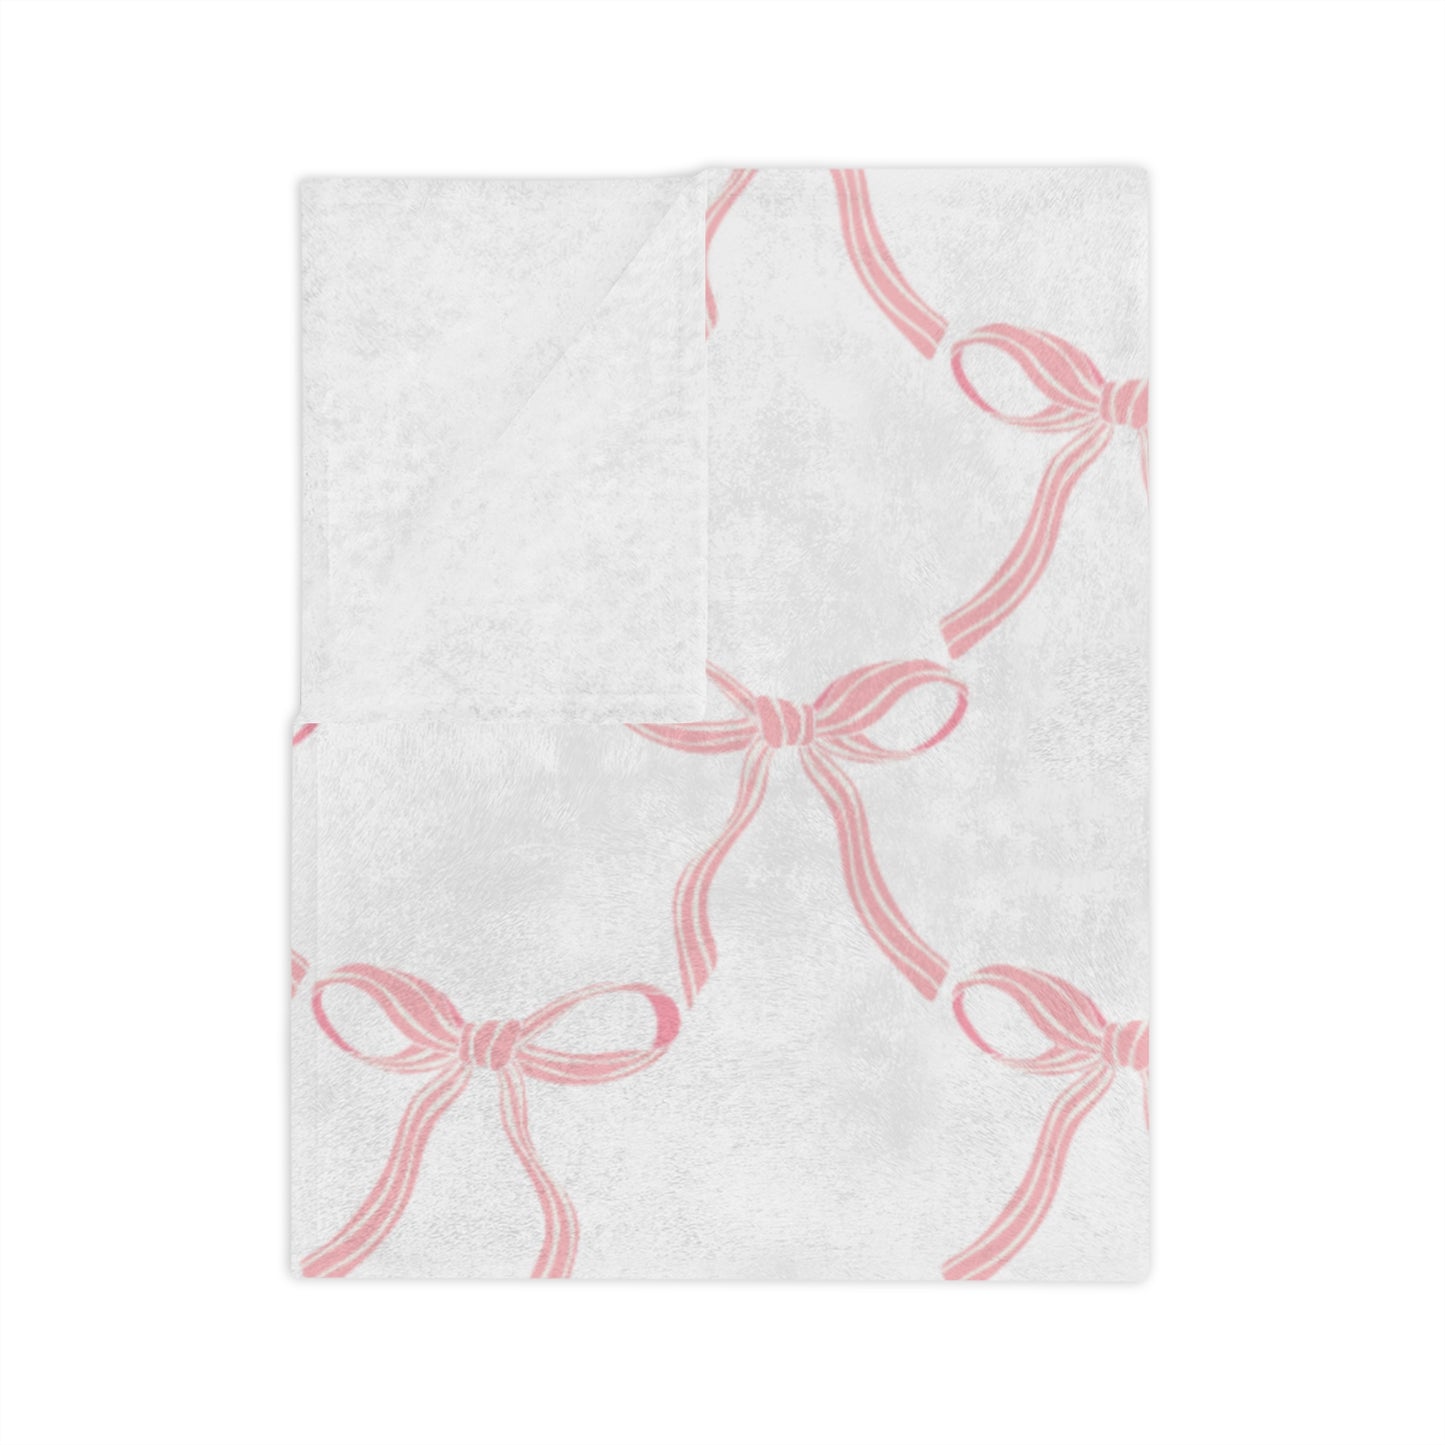 Coquette Pink Bow and Ribbon White Microfiber Blanket Multiple Sizes